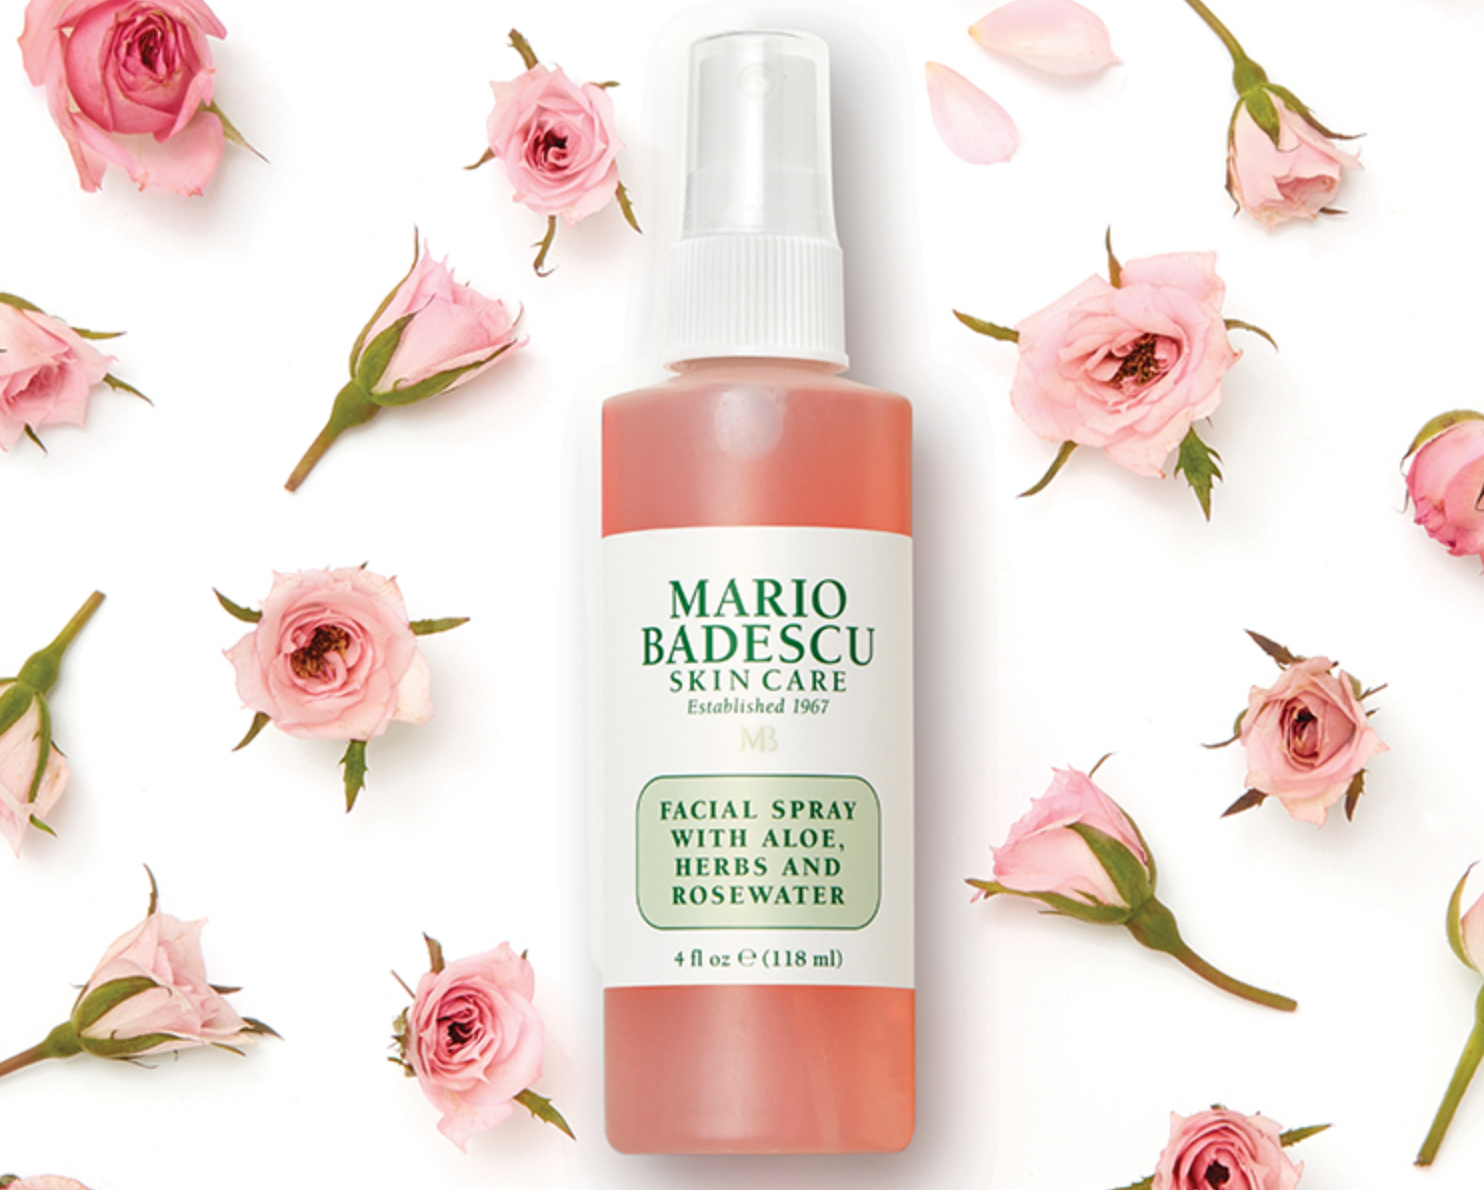 Facial Setting Spray with Aloe, Herbs and Rosewater